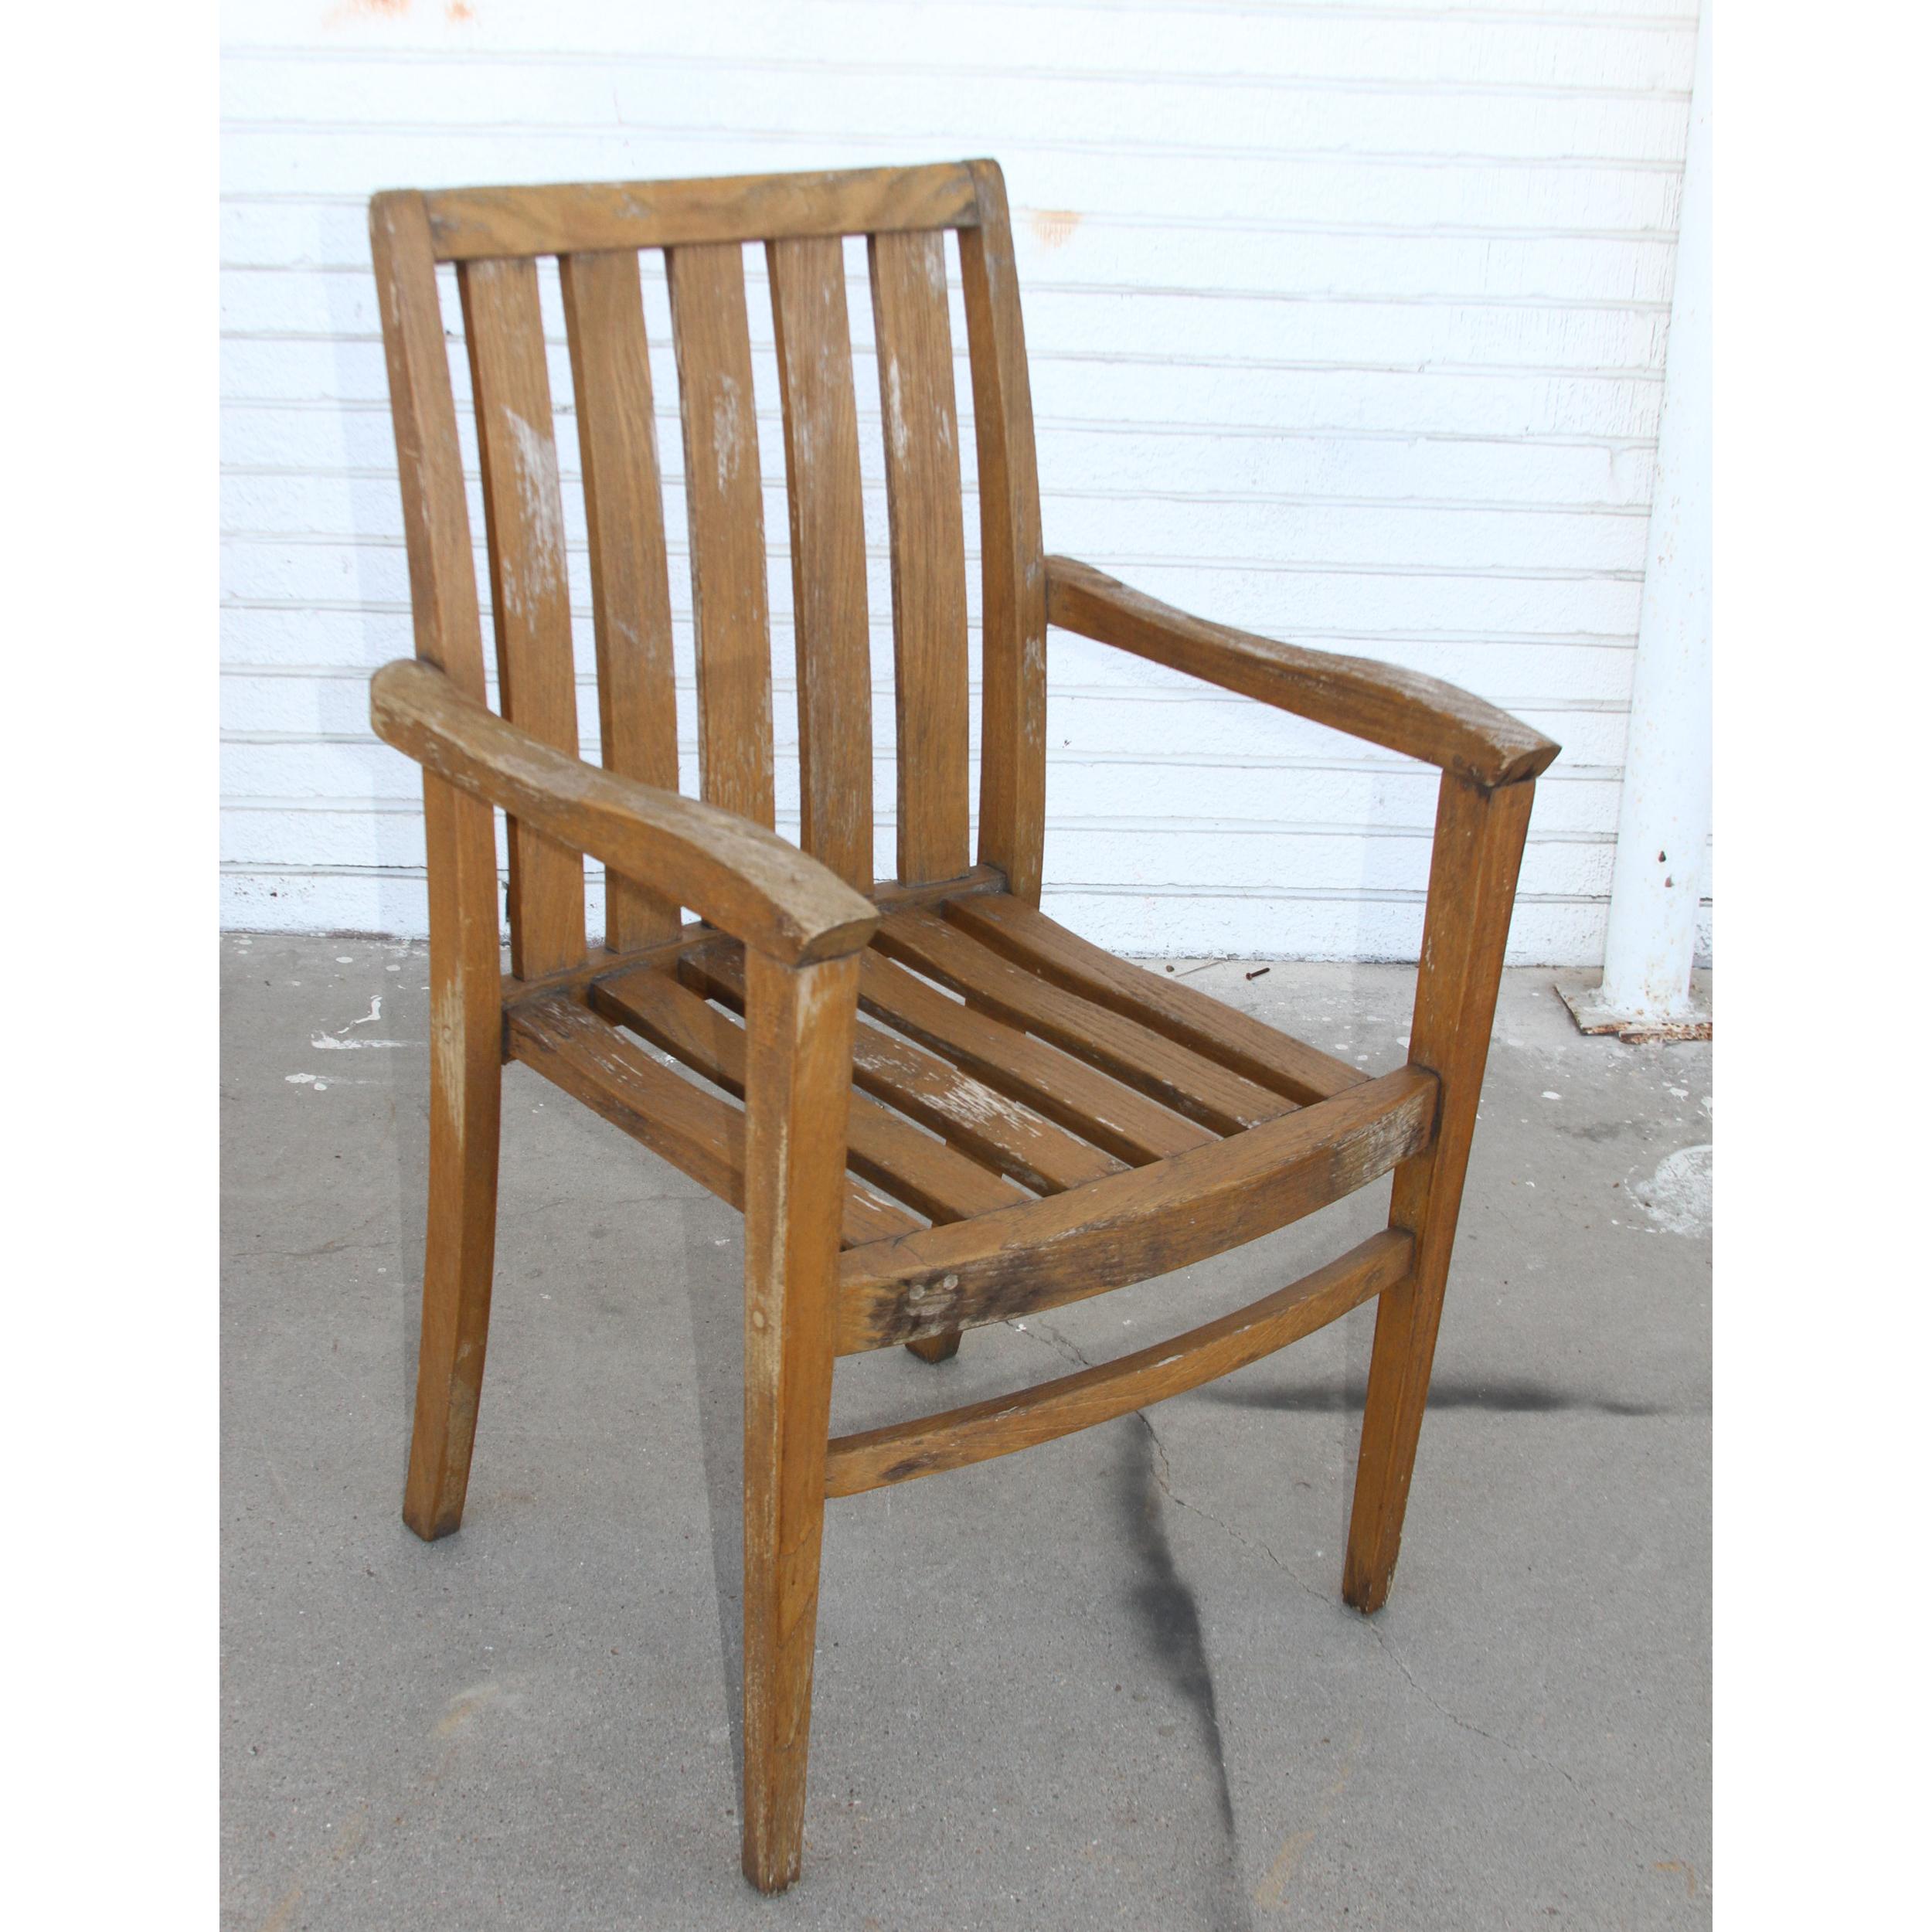 Teak Maritime Heritage Chairs In Fair Condition For Sale In Pasadena, TX